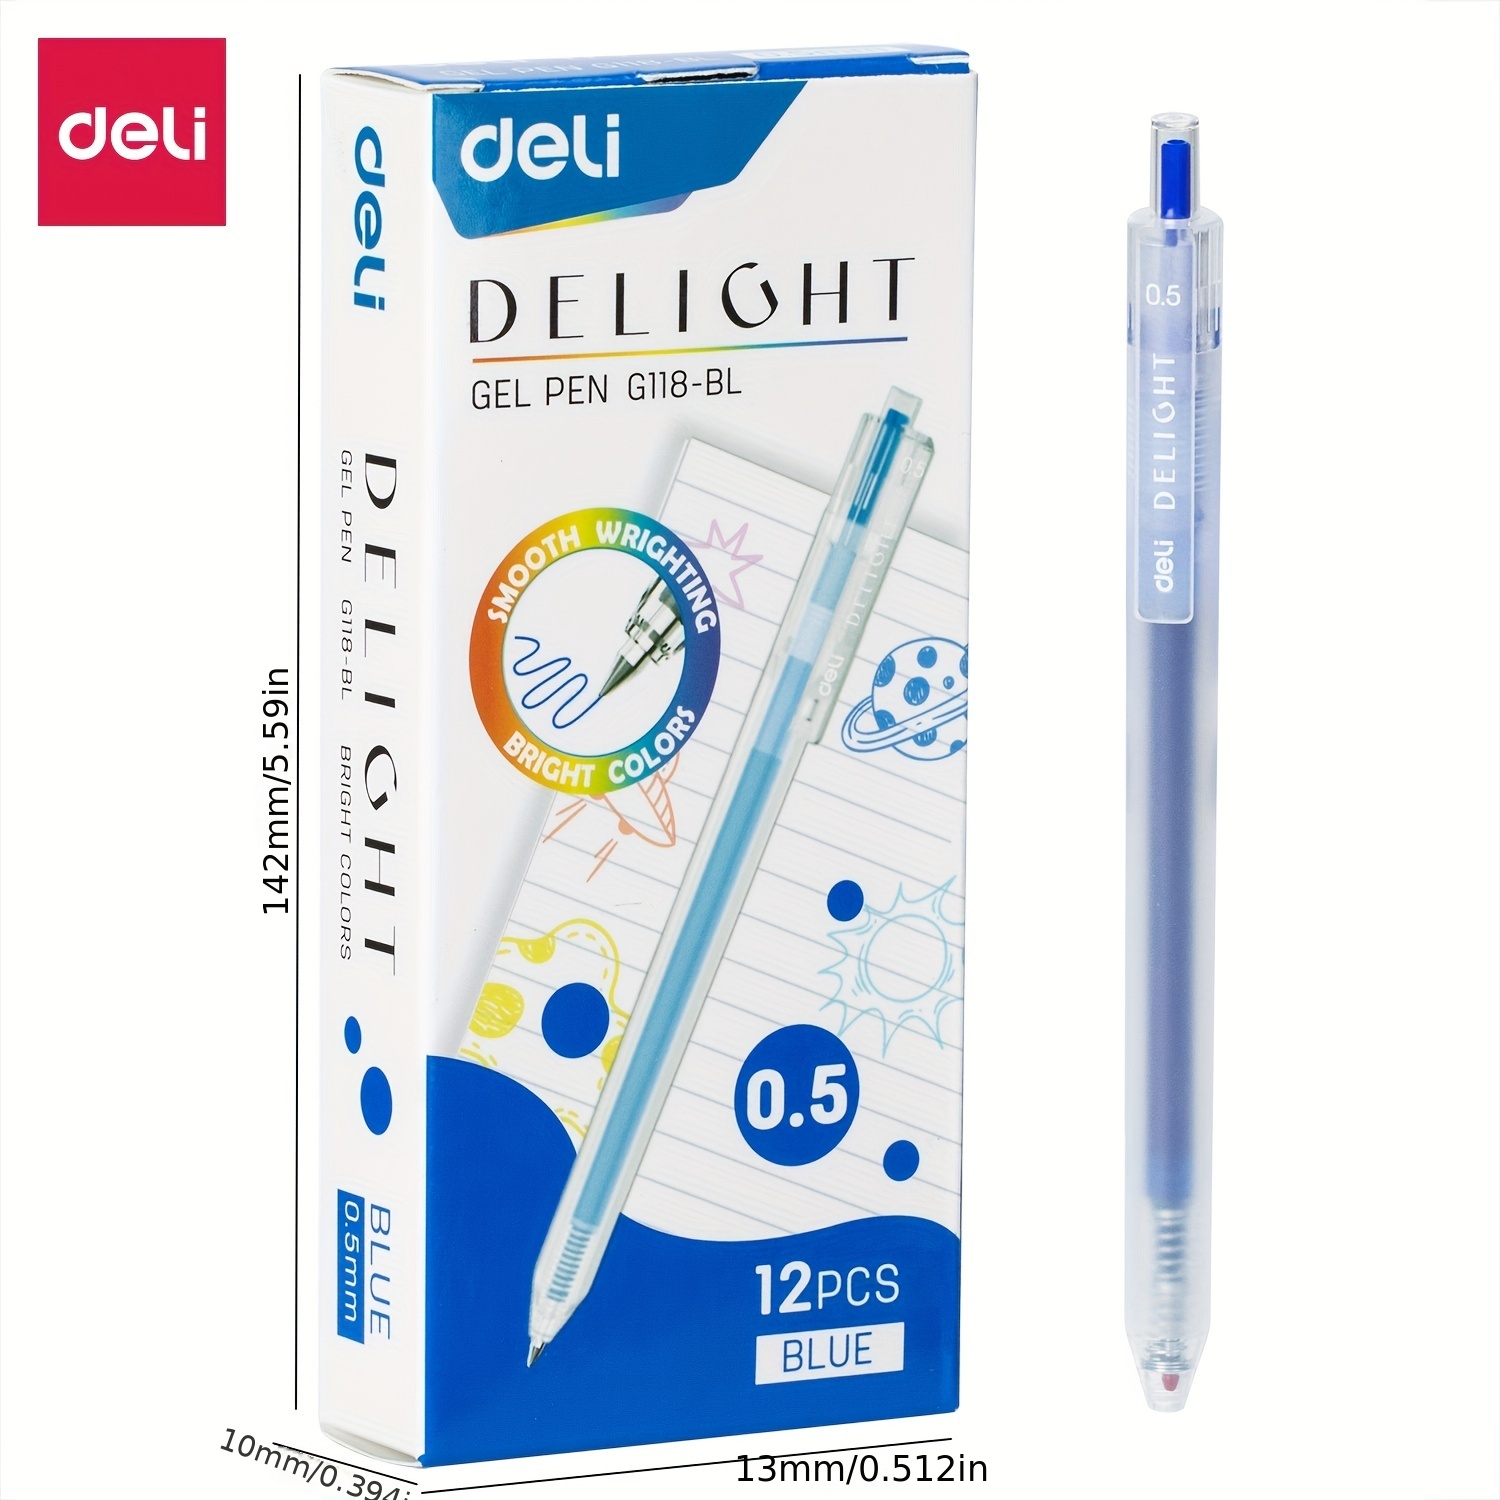 Premium Japanese Gel Pens - Vibrant 12 Colors - Smooth Writing - Office &  School Supplies - Great Gift